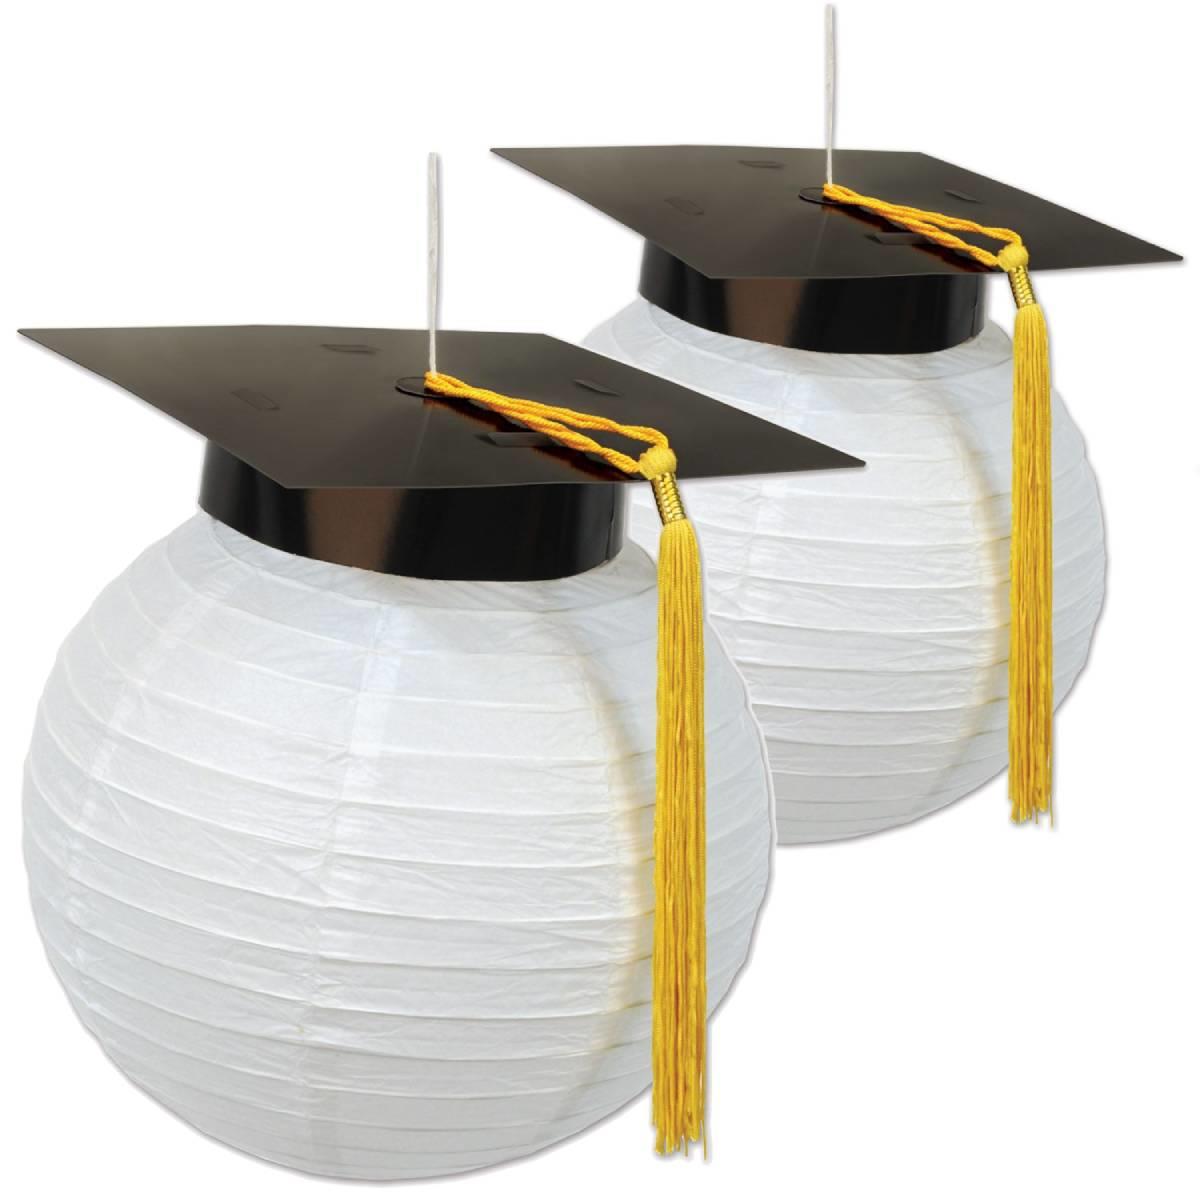 Pack of two Graduation Cap Paper Lanterns by Beistle 54933 available here at Karnival Costumes online party shop